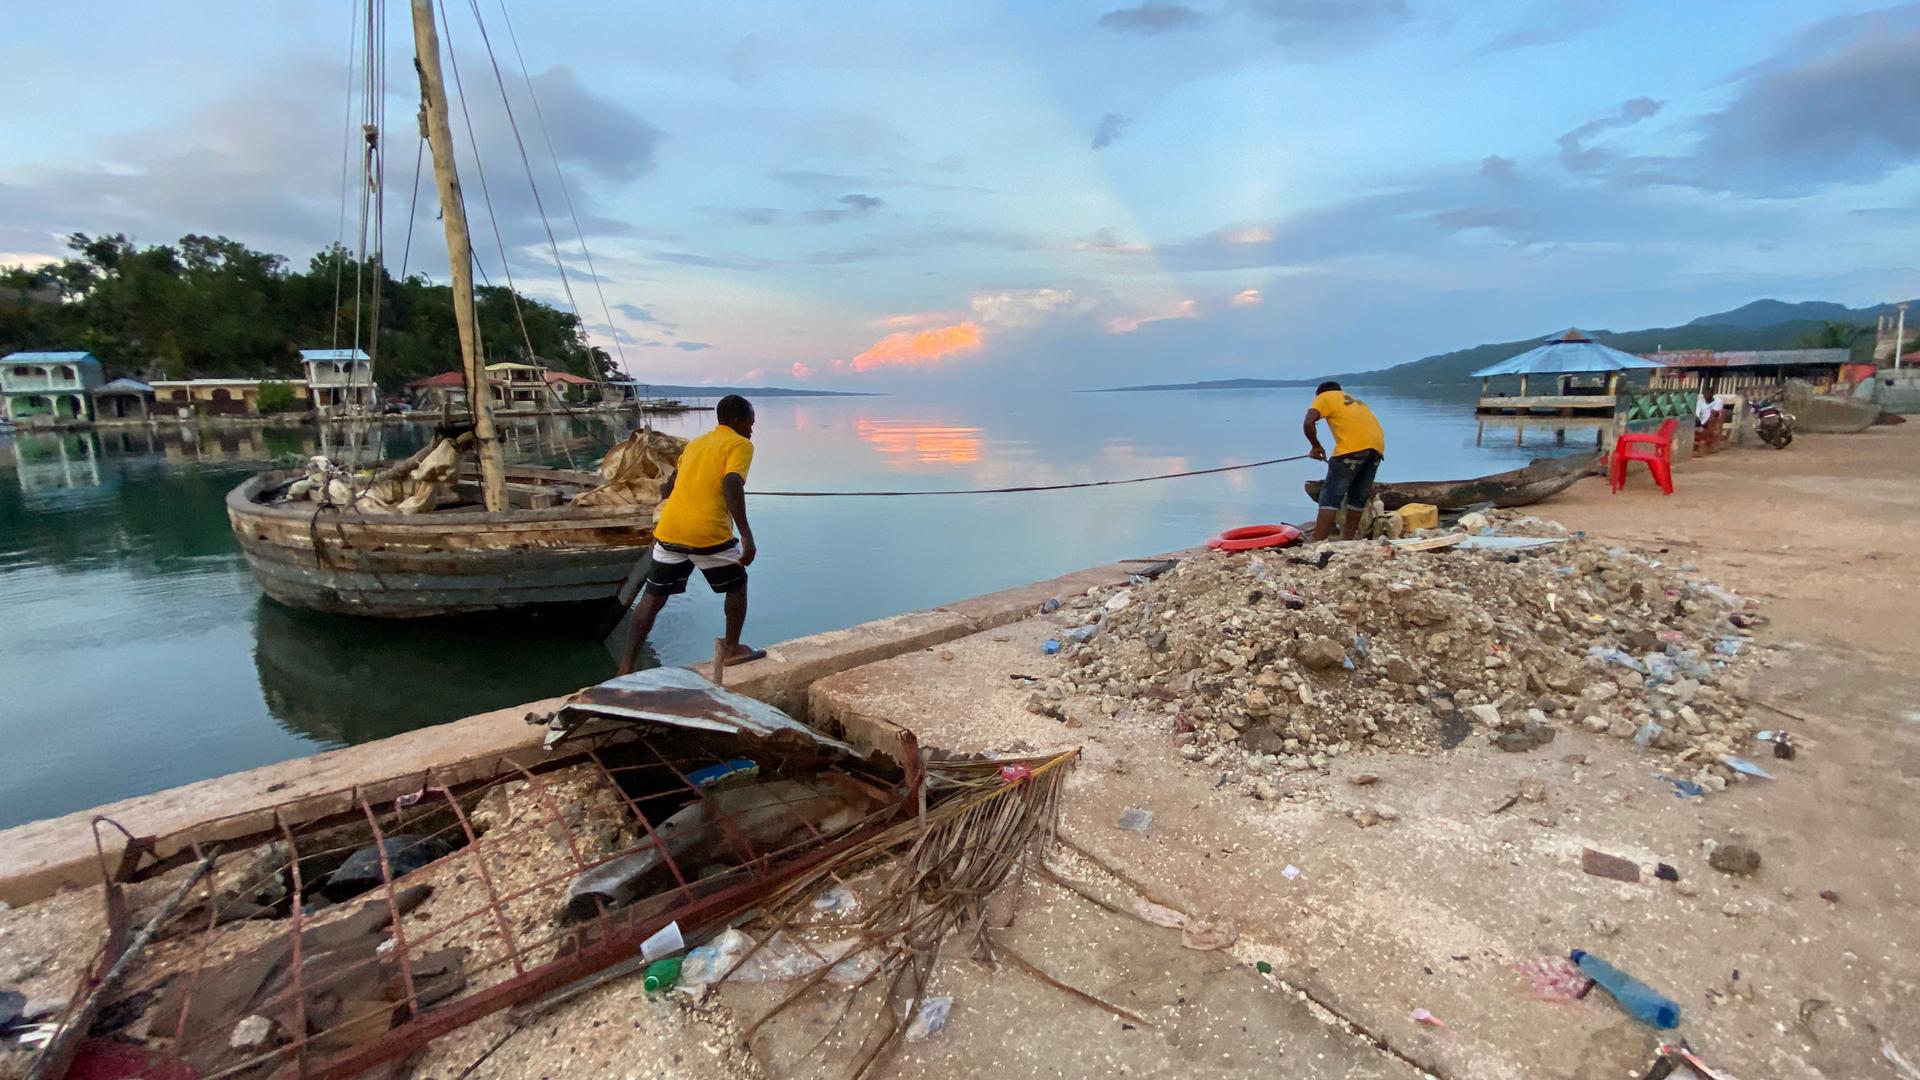 In Pestel, Haiti, on the country's southern peninsula, Jean-Robert Leger, left, brings in a boat that is a bit smaller than the one he has attempted in to sail to the United States, along with many other migrants aboard.